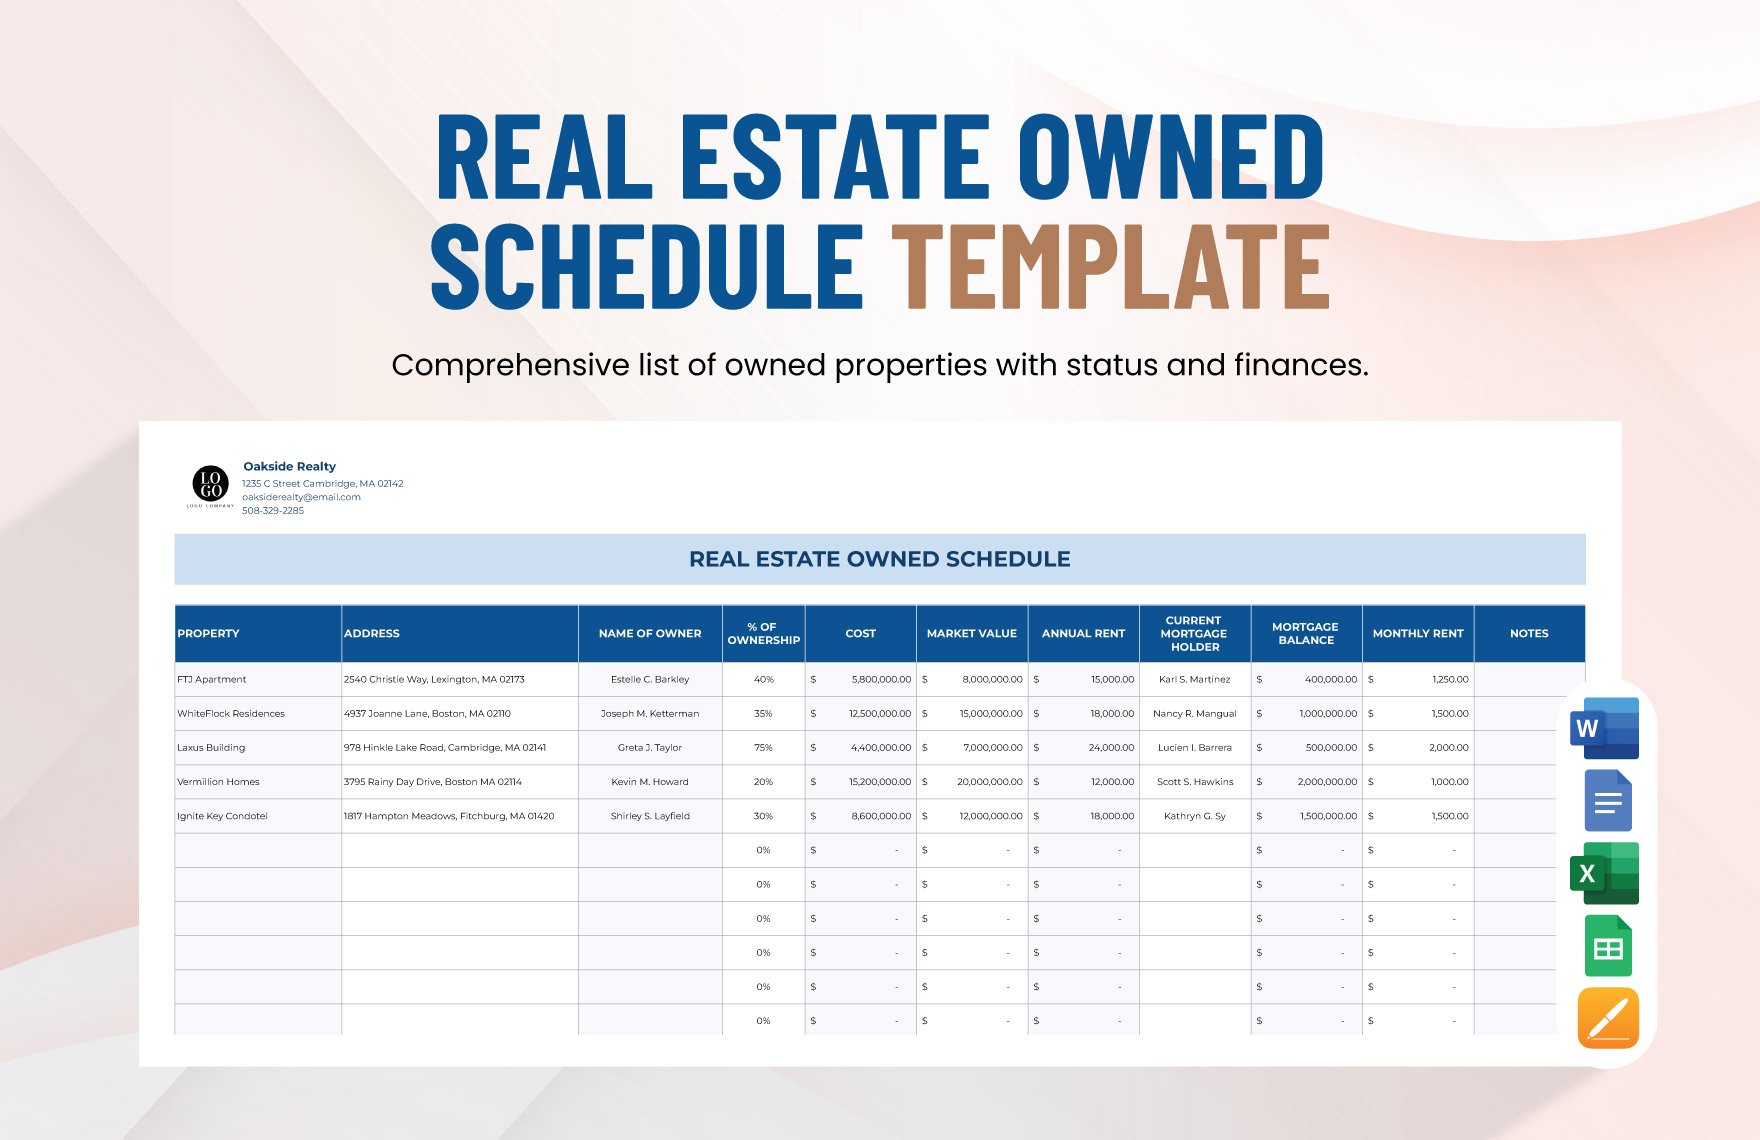 Real Estate Owned Schedule Template in Word, Google Docs, Excel, Google Sheets, Apple Pages